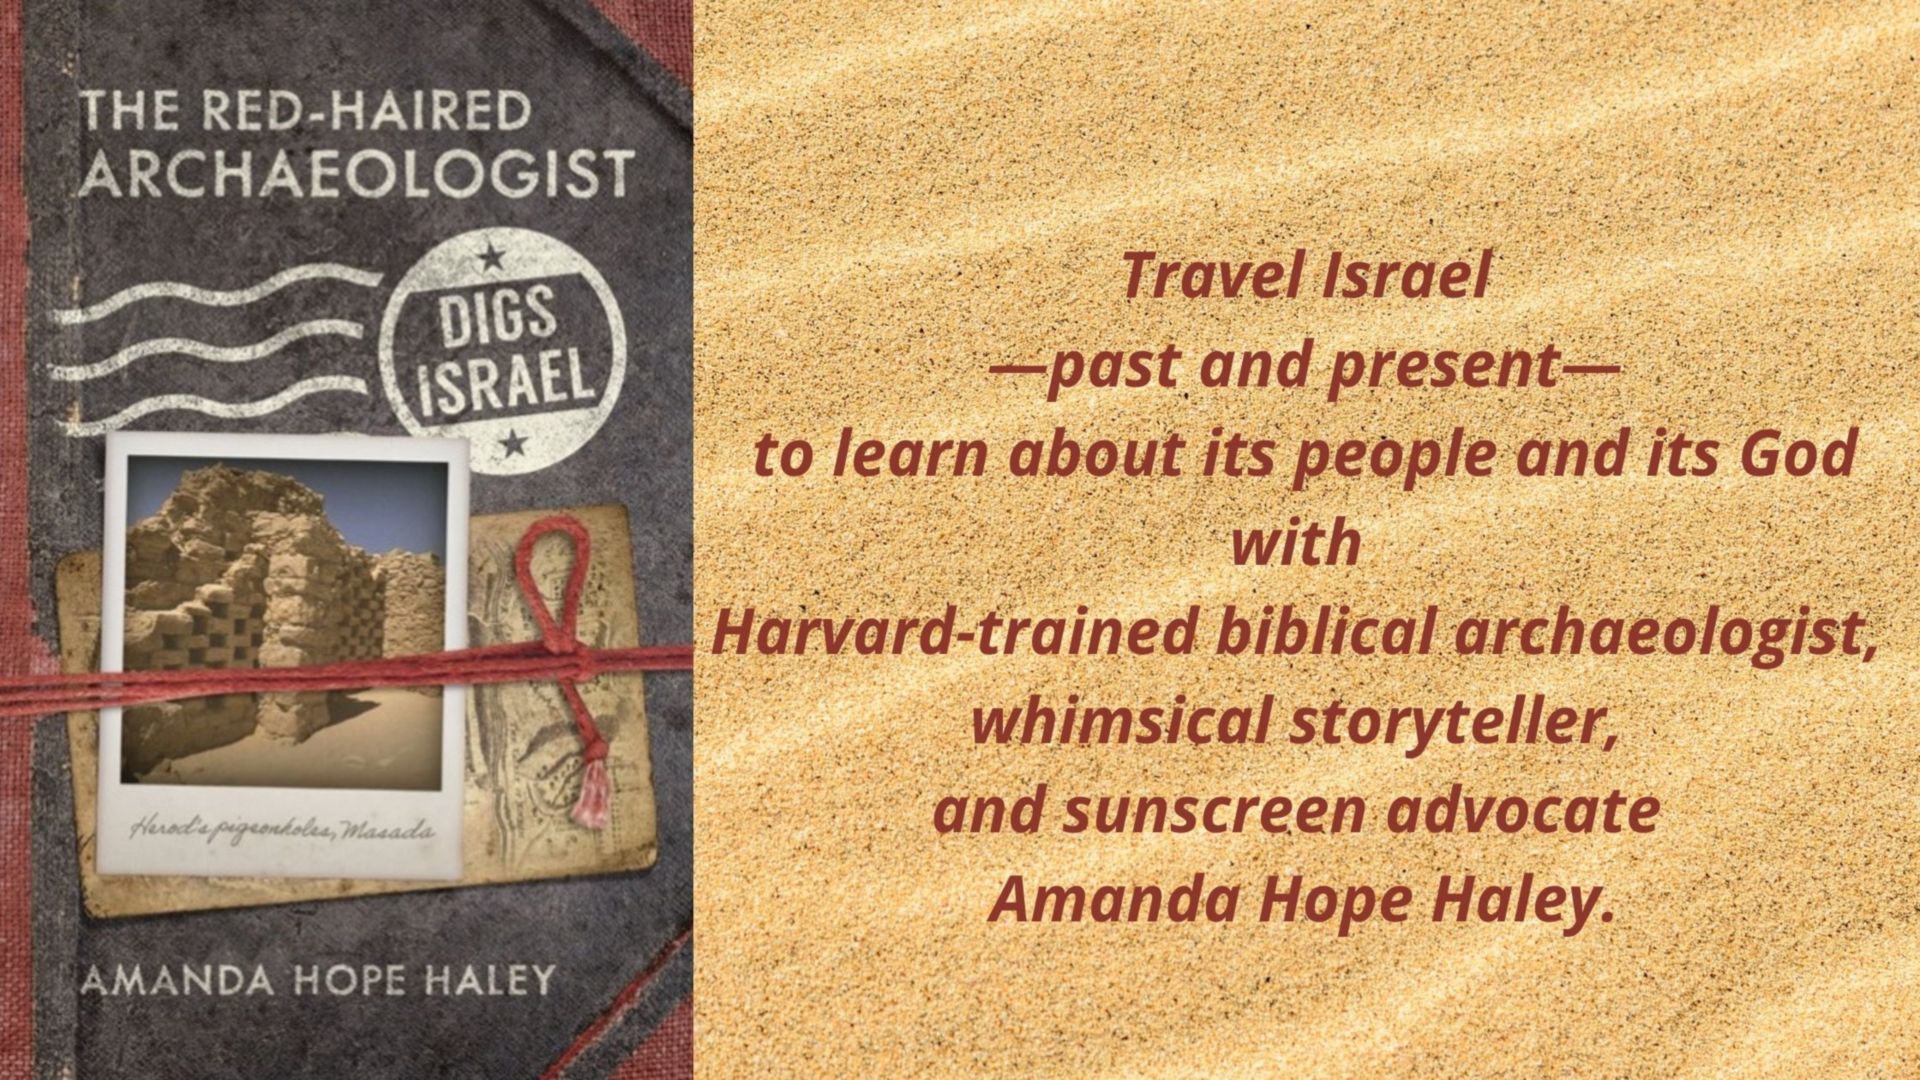 Book review on 'The Red Haired Archaeologist Digs Israel'